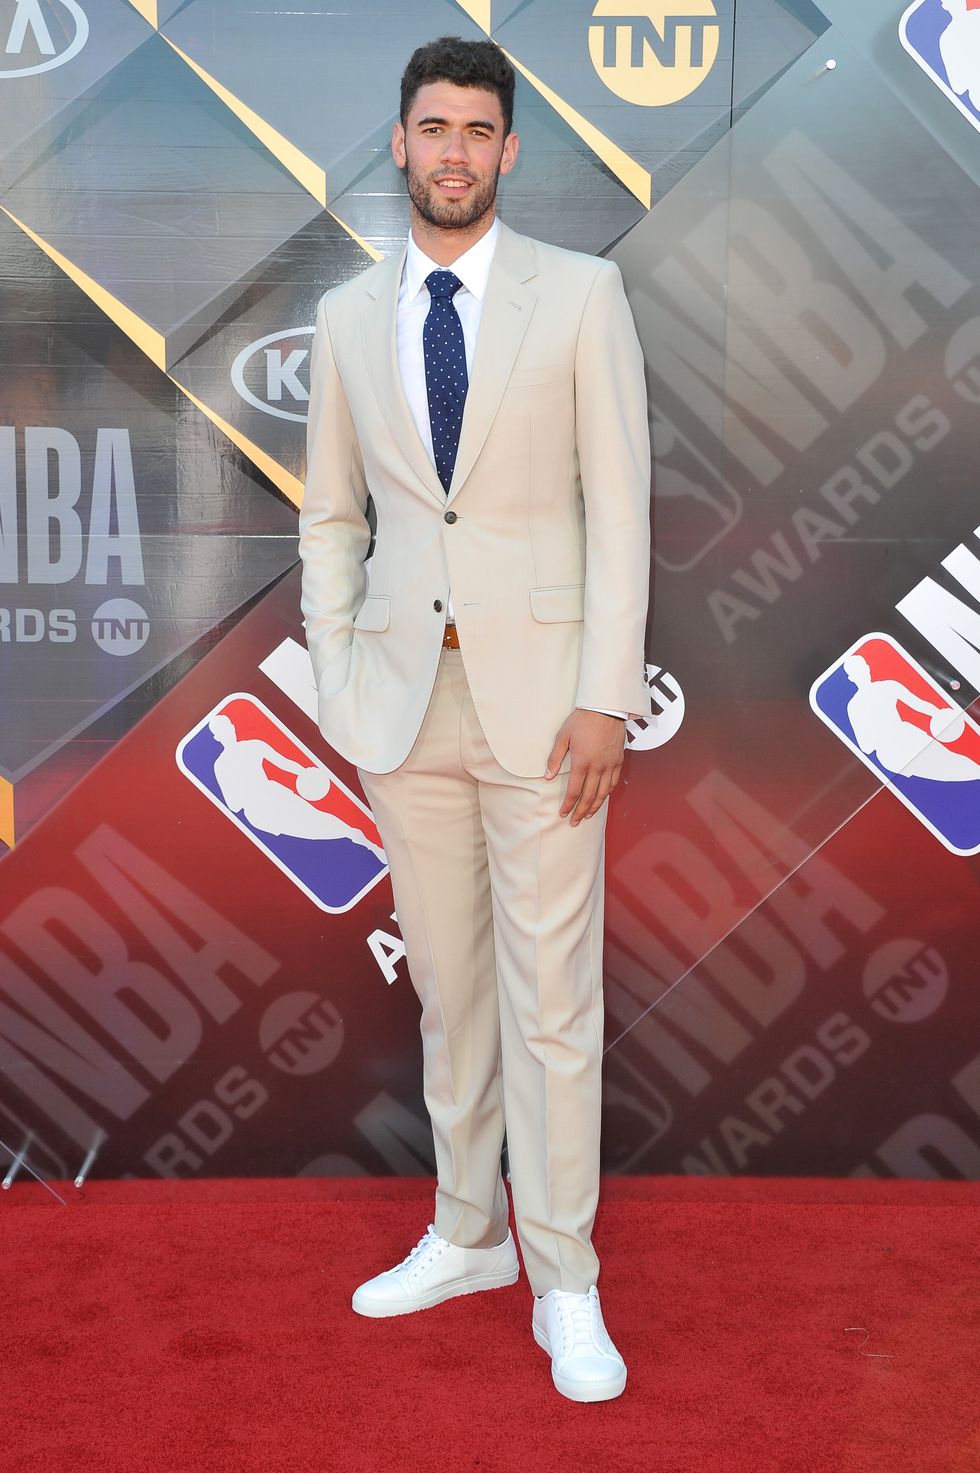 Turner Sports, NBA To Live Stream The NBA Awards: Red Carpet LIVE